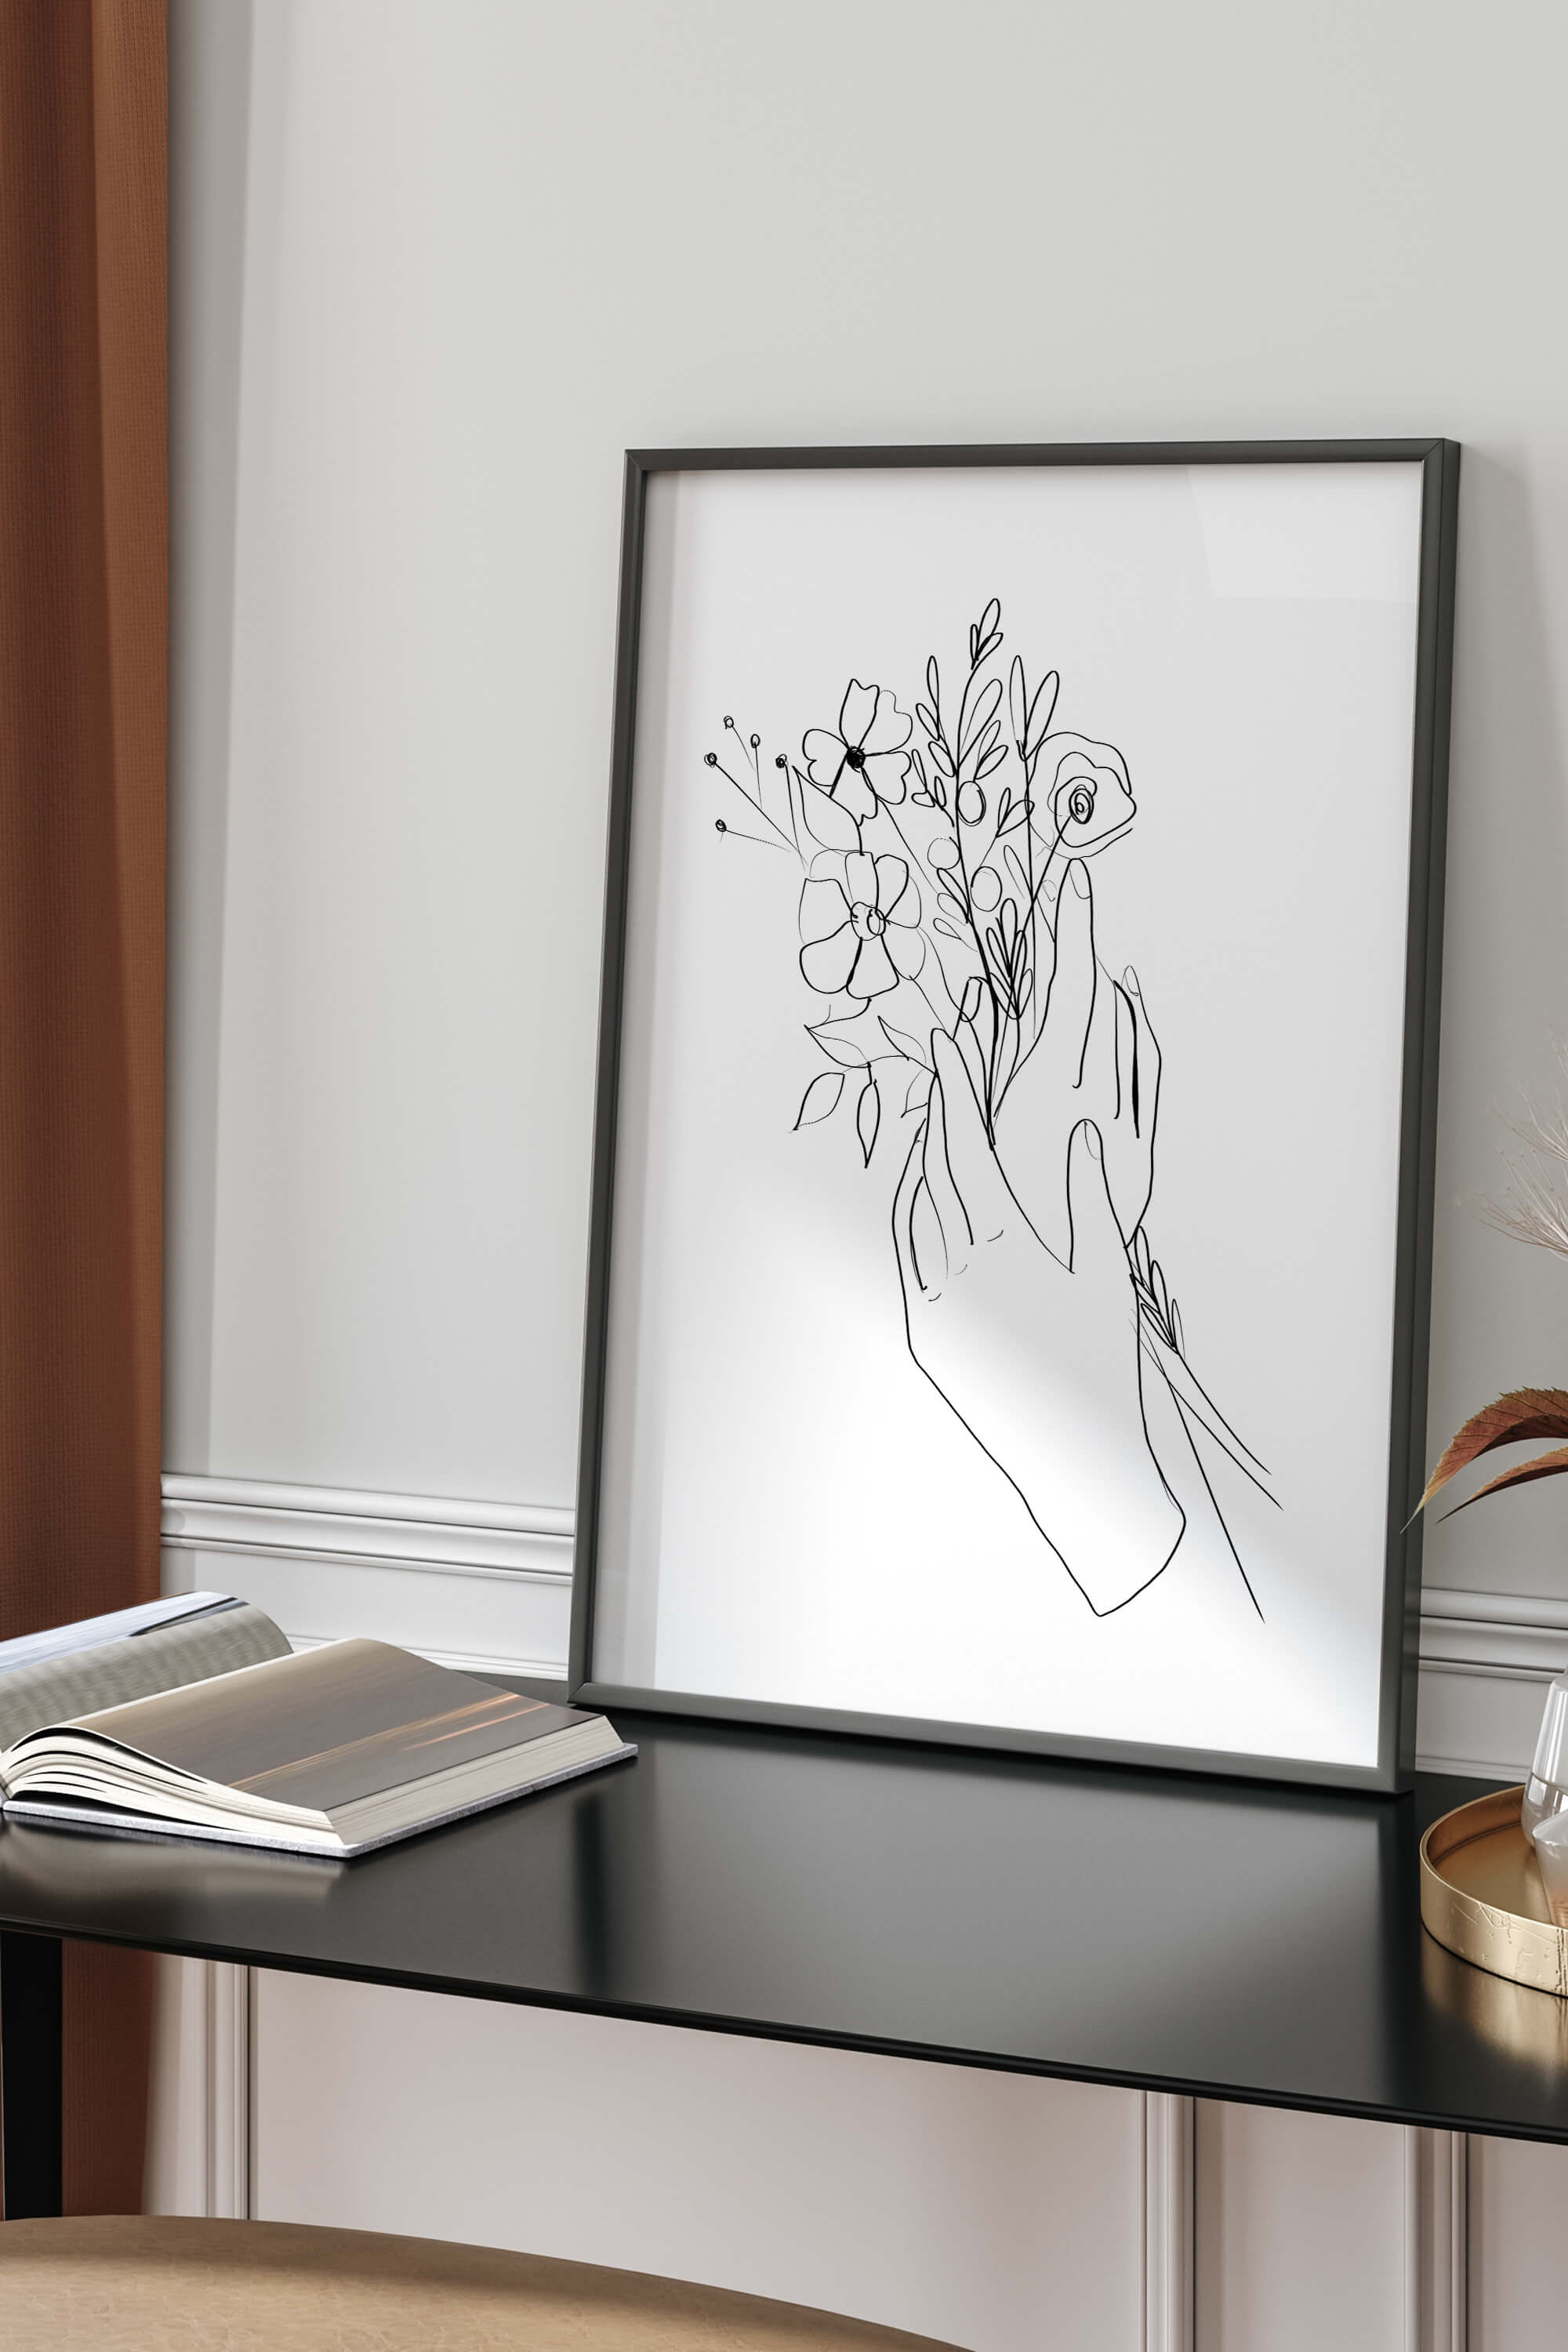 A stunning art print featuring delicate lines and monochromatic tones. Add a touch of timeless elegance to your space with this unique and sophisticated wall decor.